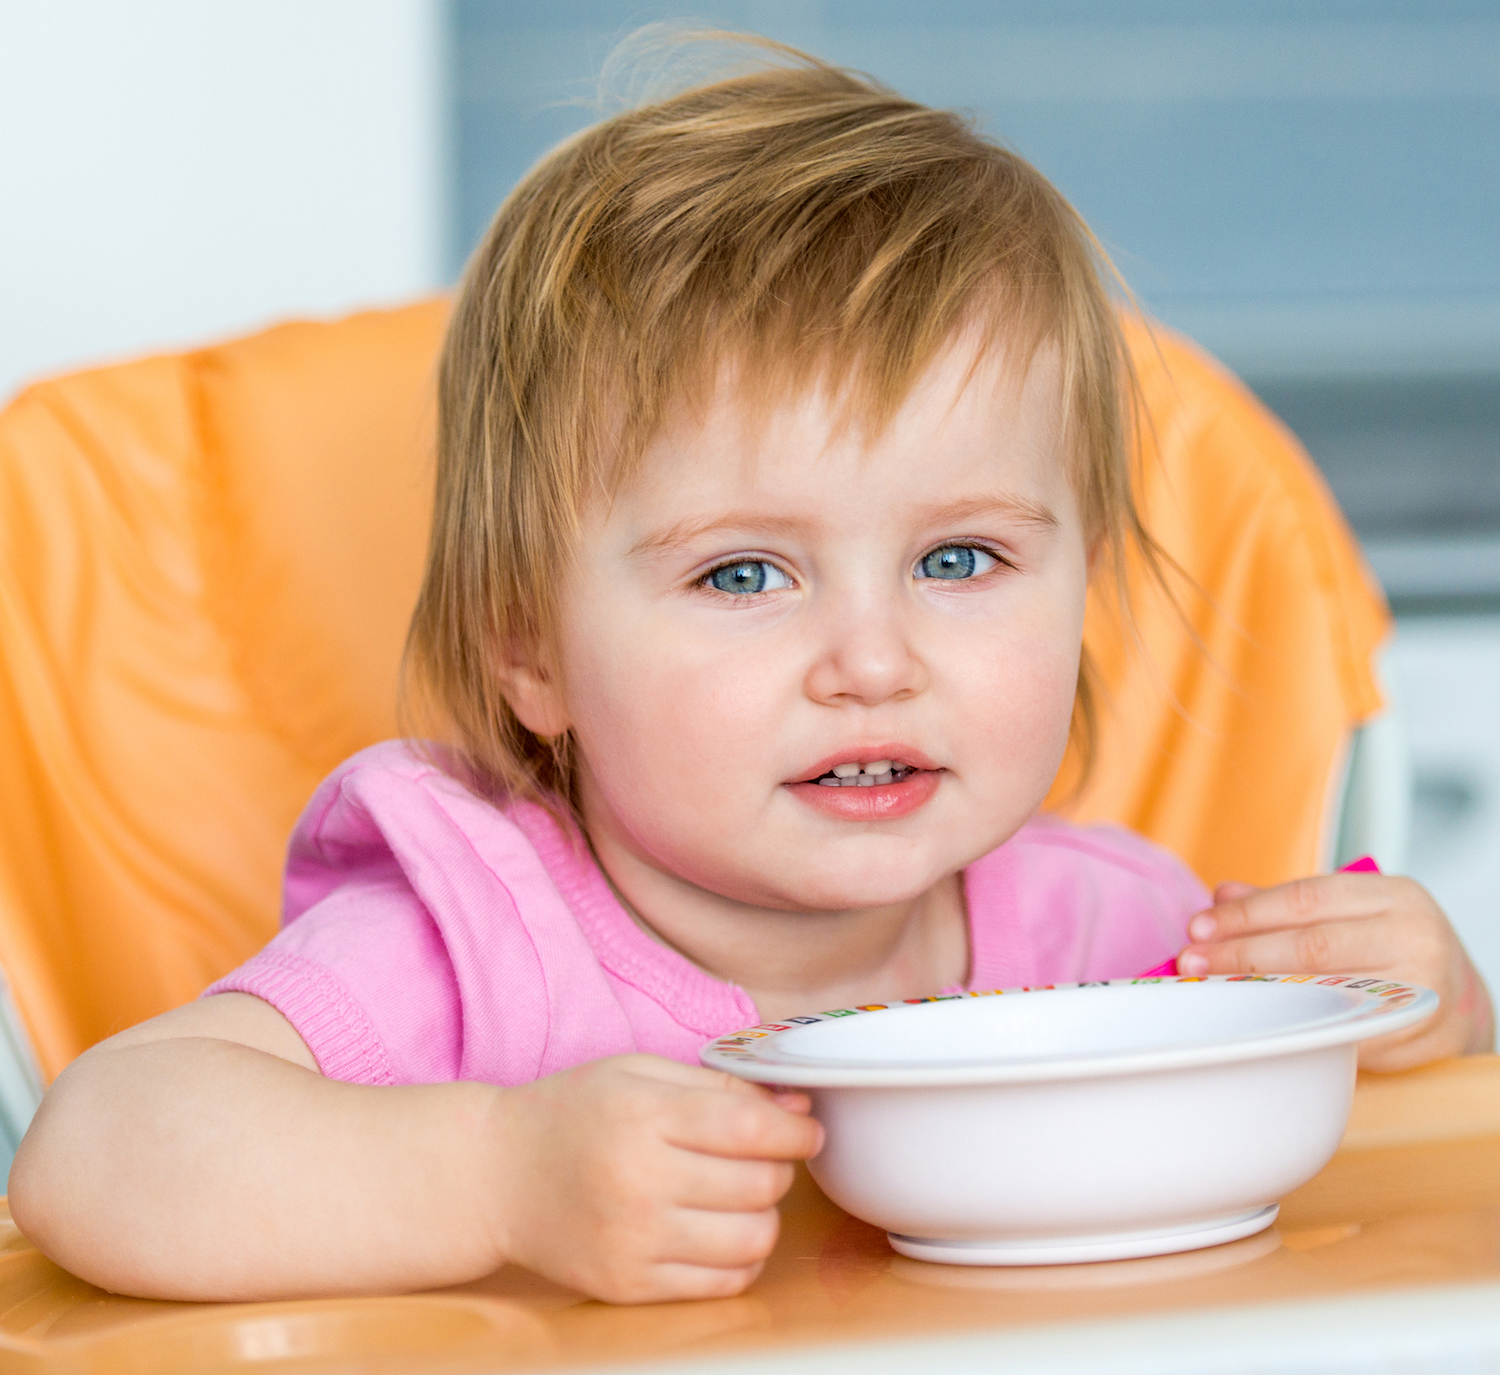 Young child eating from bowl.